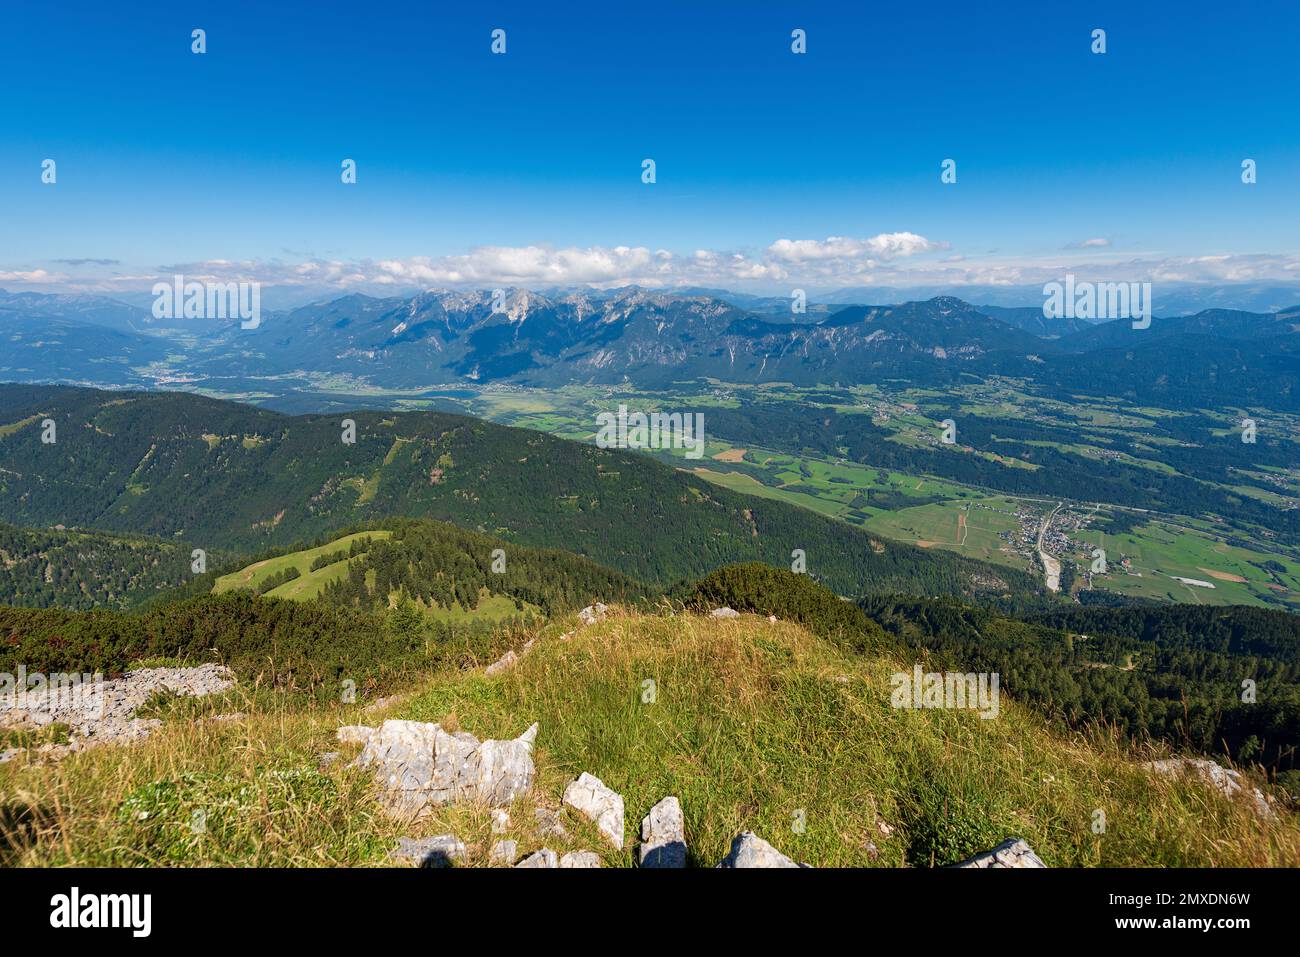 Aerial view of Austria from the Mountain Peak of the Osternig or Oisternig, Carnic Alps, Gailtal Alps, Feistritz an der Gail municipality, Carinthia. Stock Photo